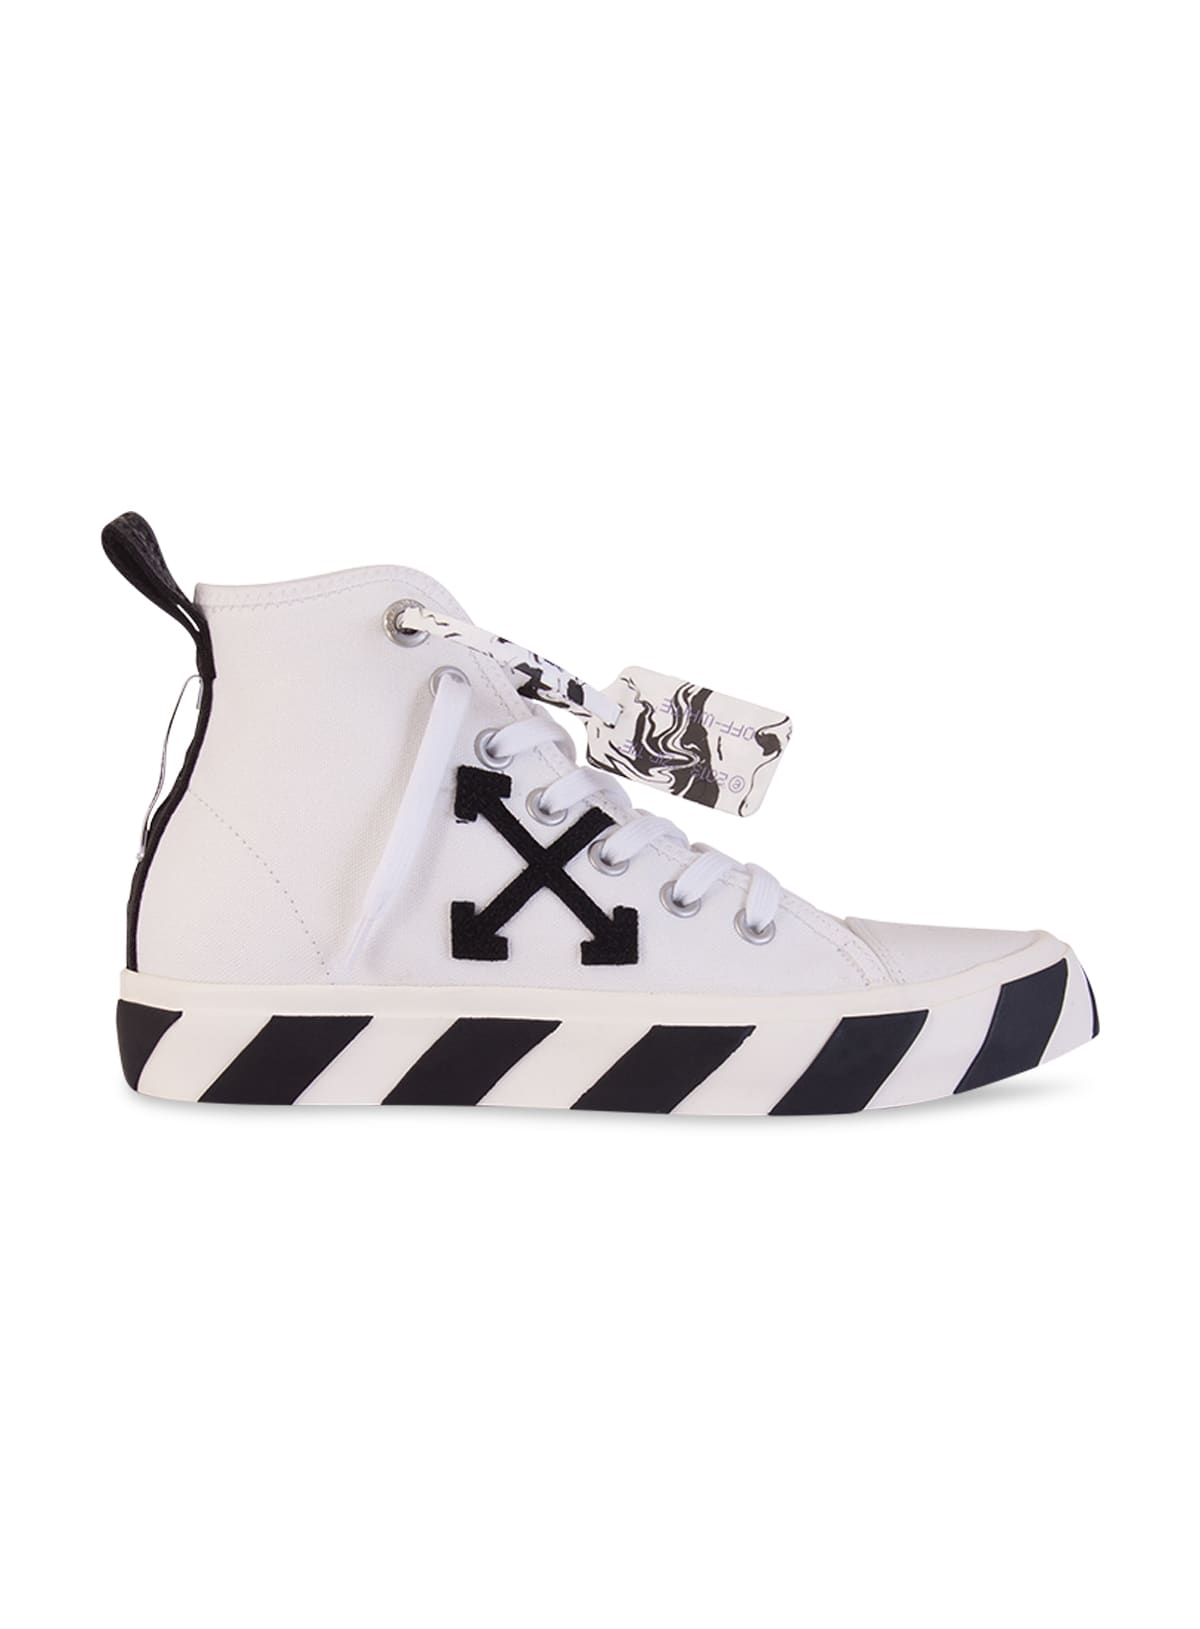 OFF-WHITE OFF-WHITE MID TOP VULCANIZED CANVAS,OMIA119 FAB0010110